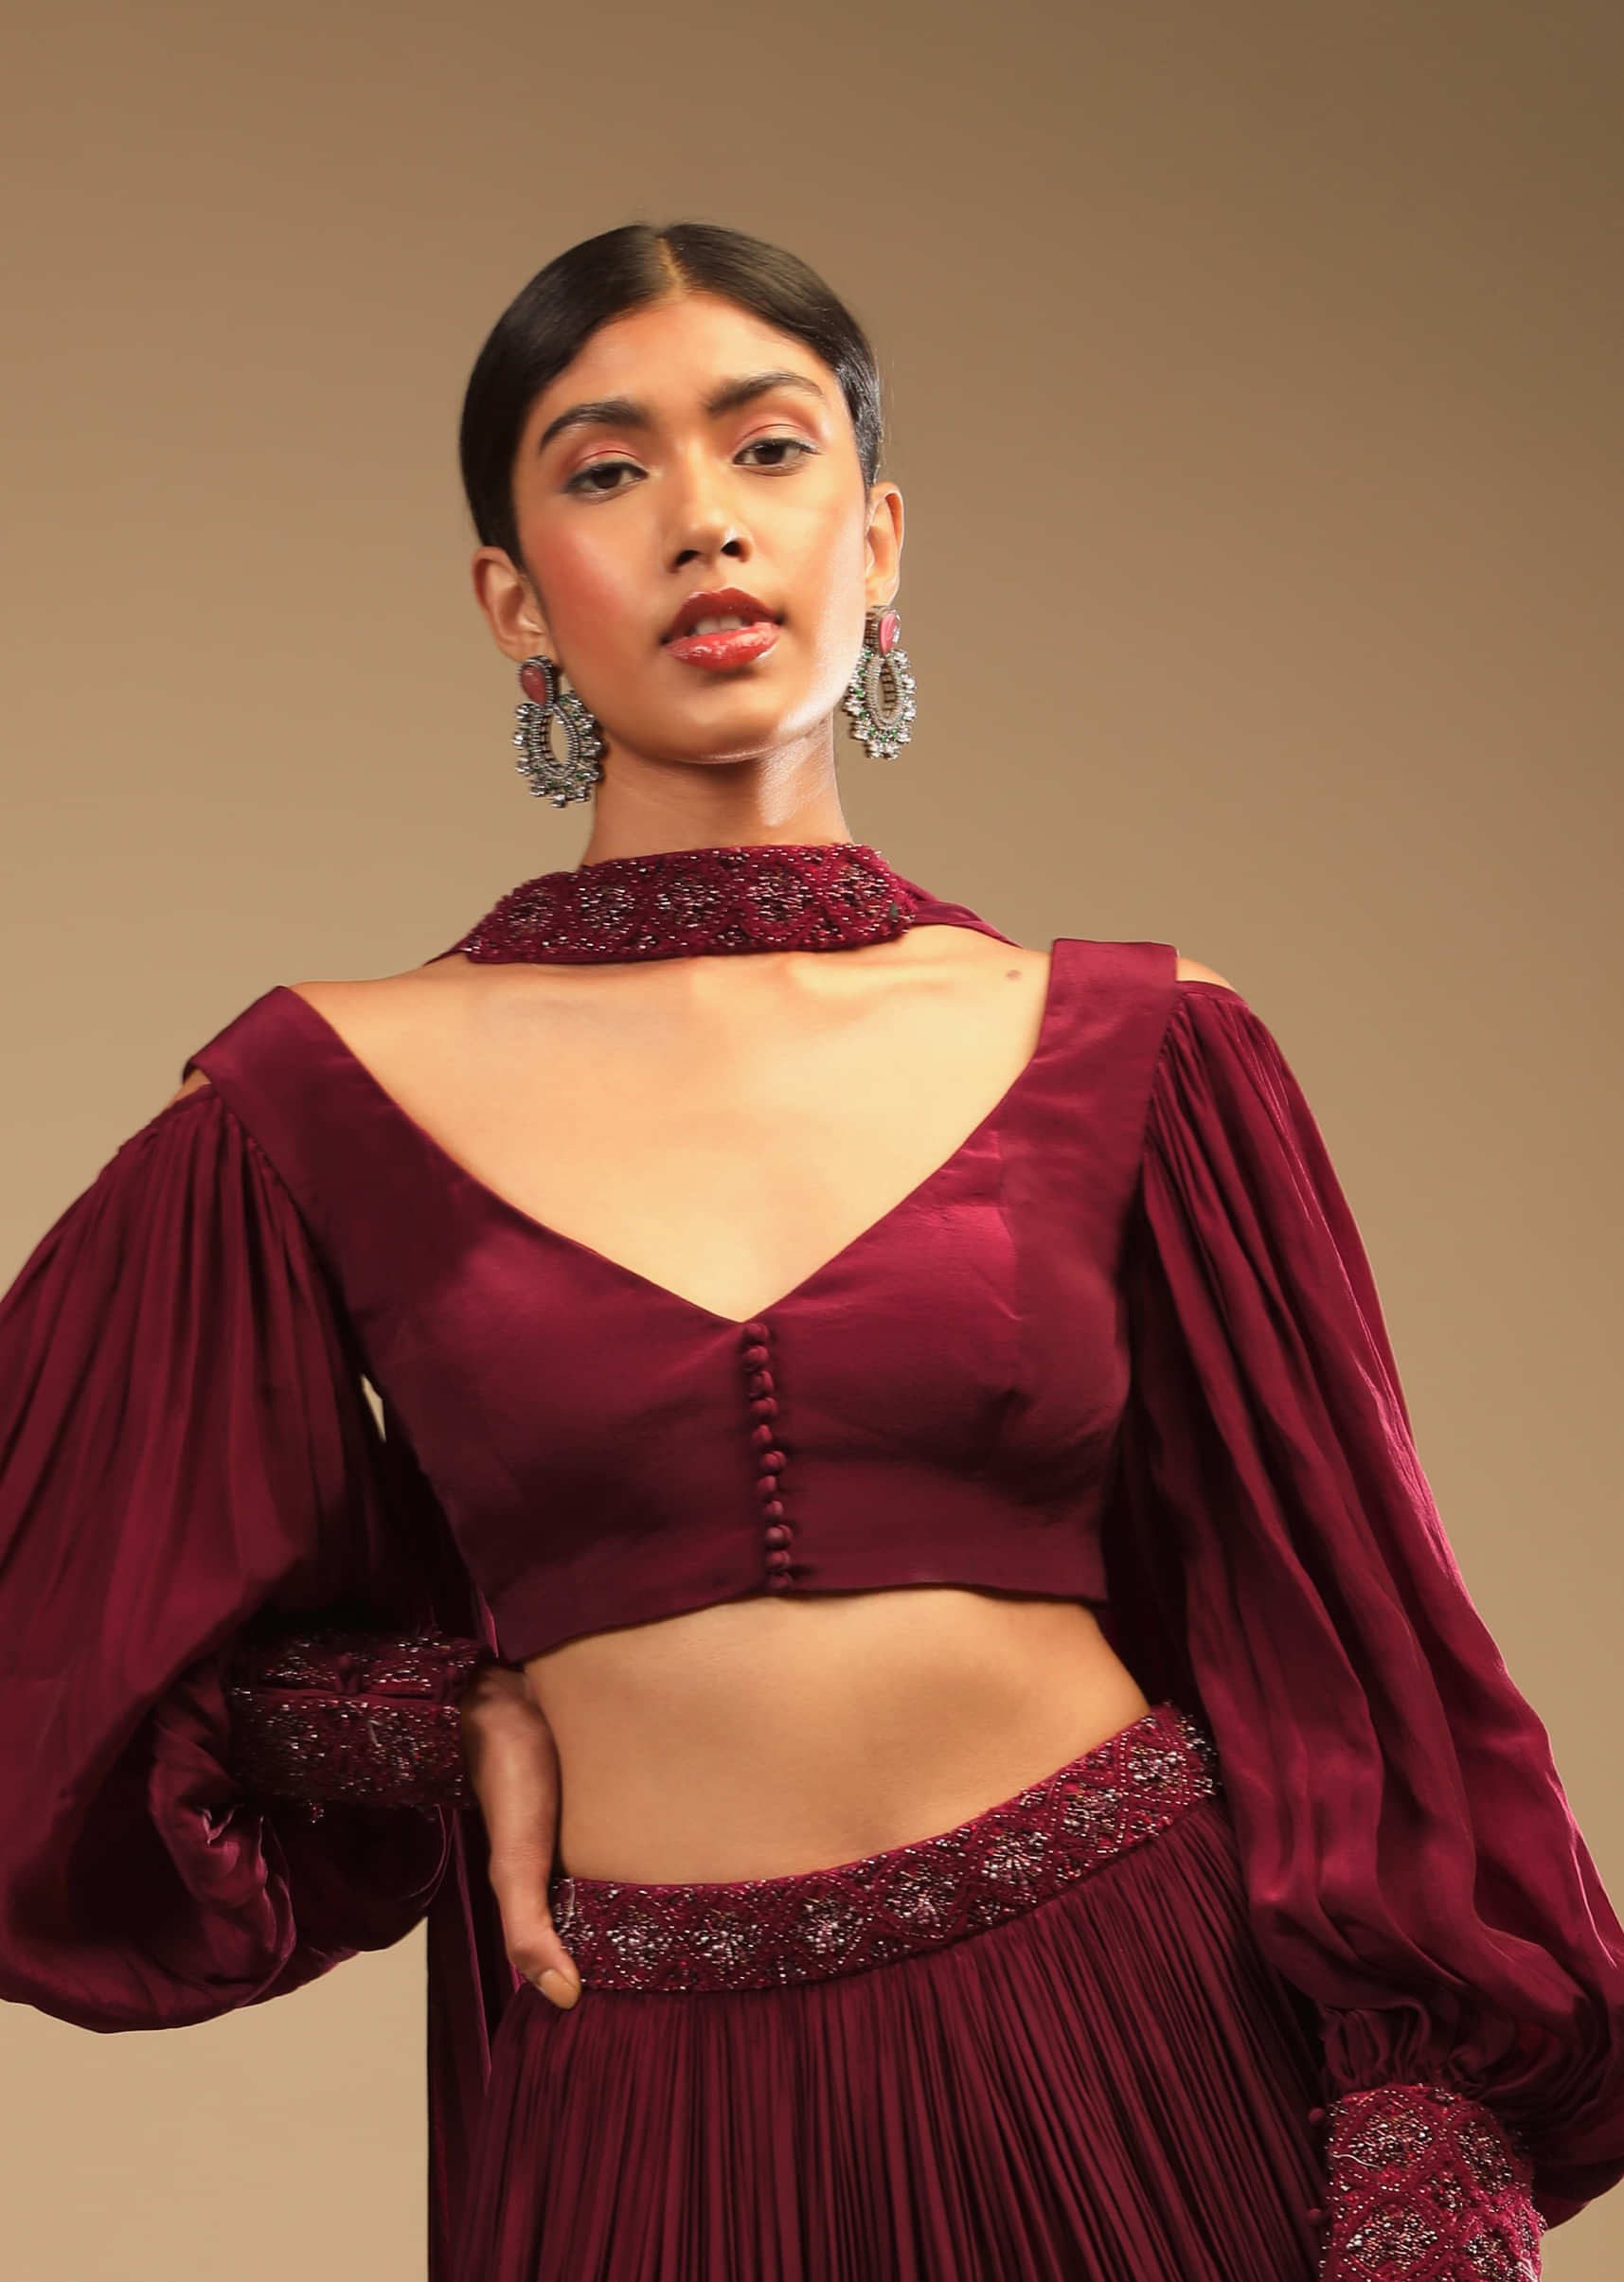 Maroon Lehenga In Crepe With Embroidery Detailing On The Waist And Bishop Sleeved Crop Top 